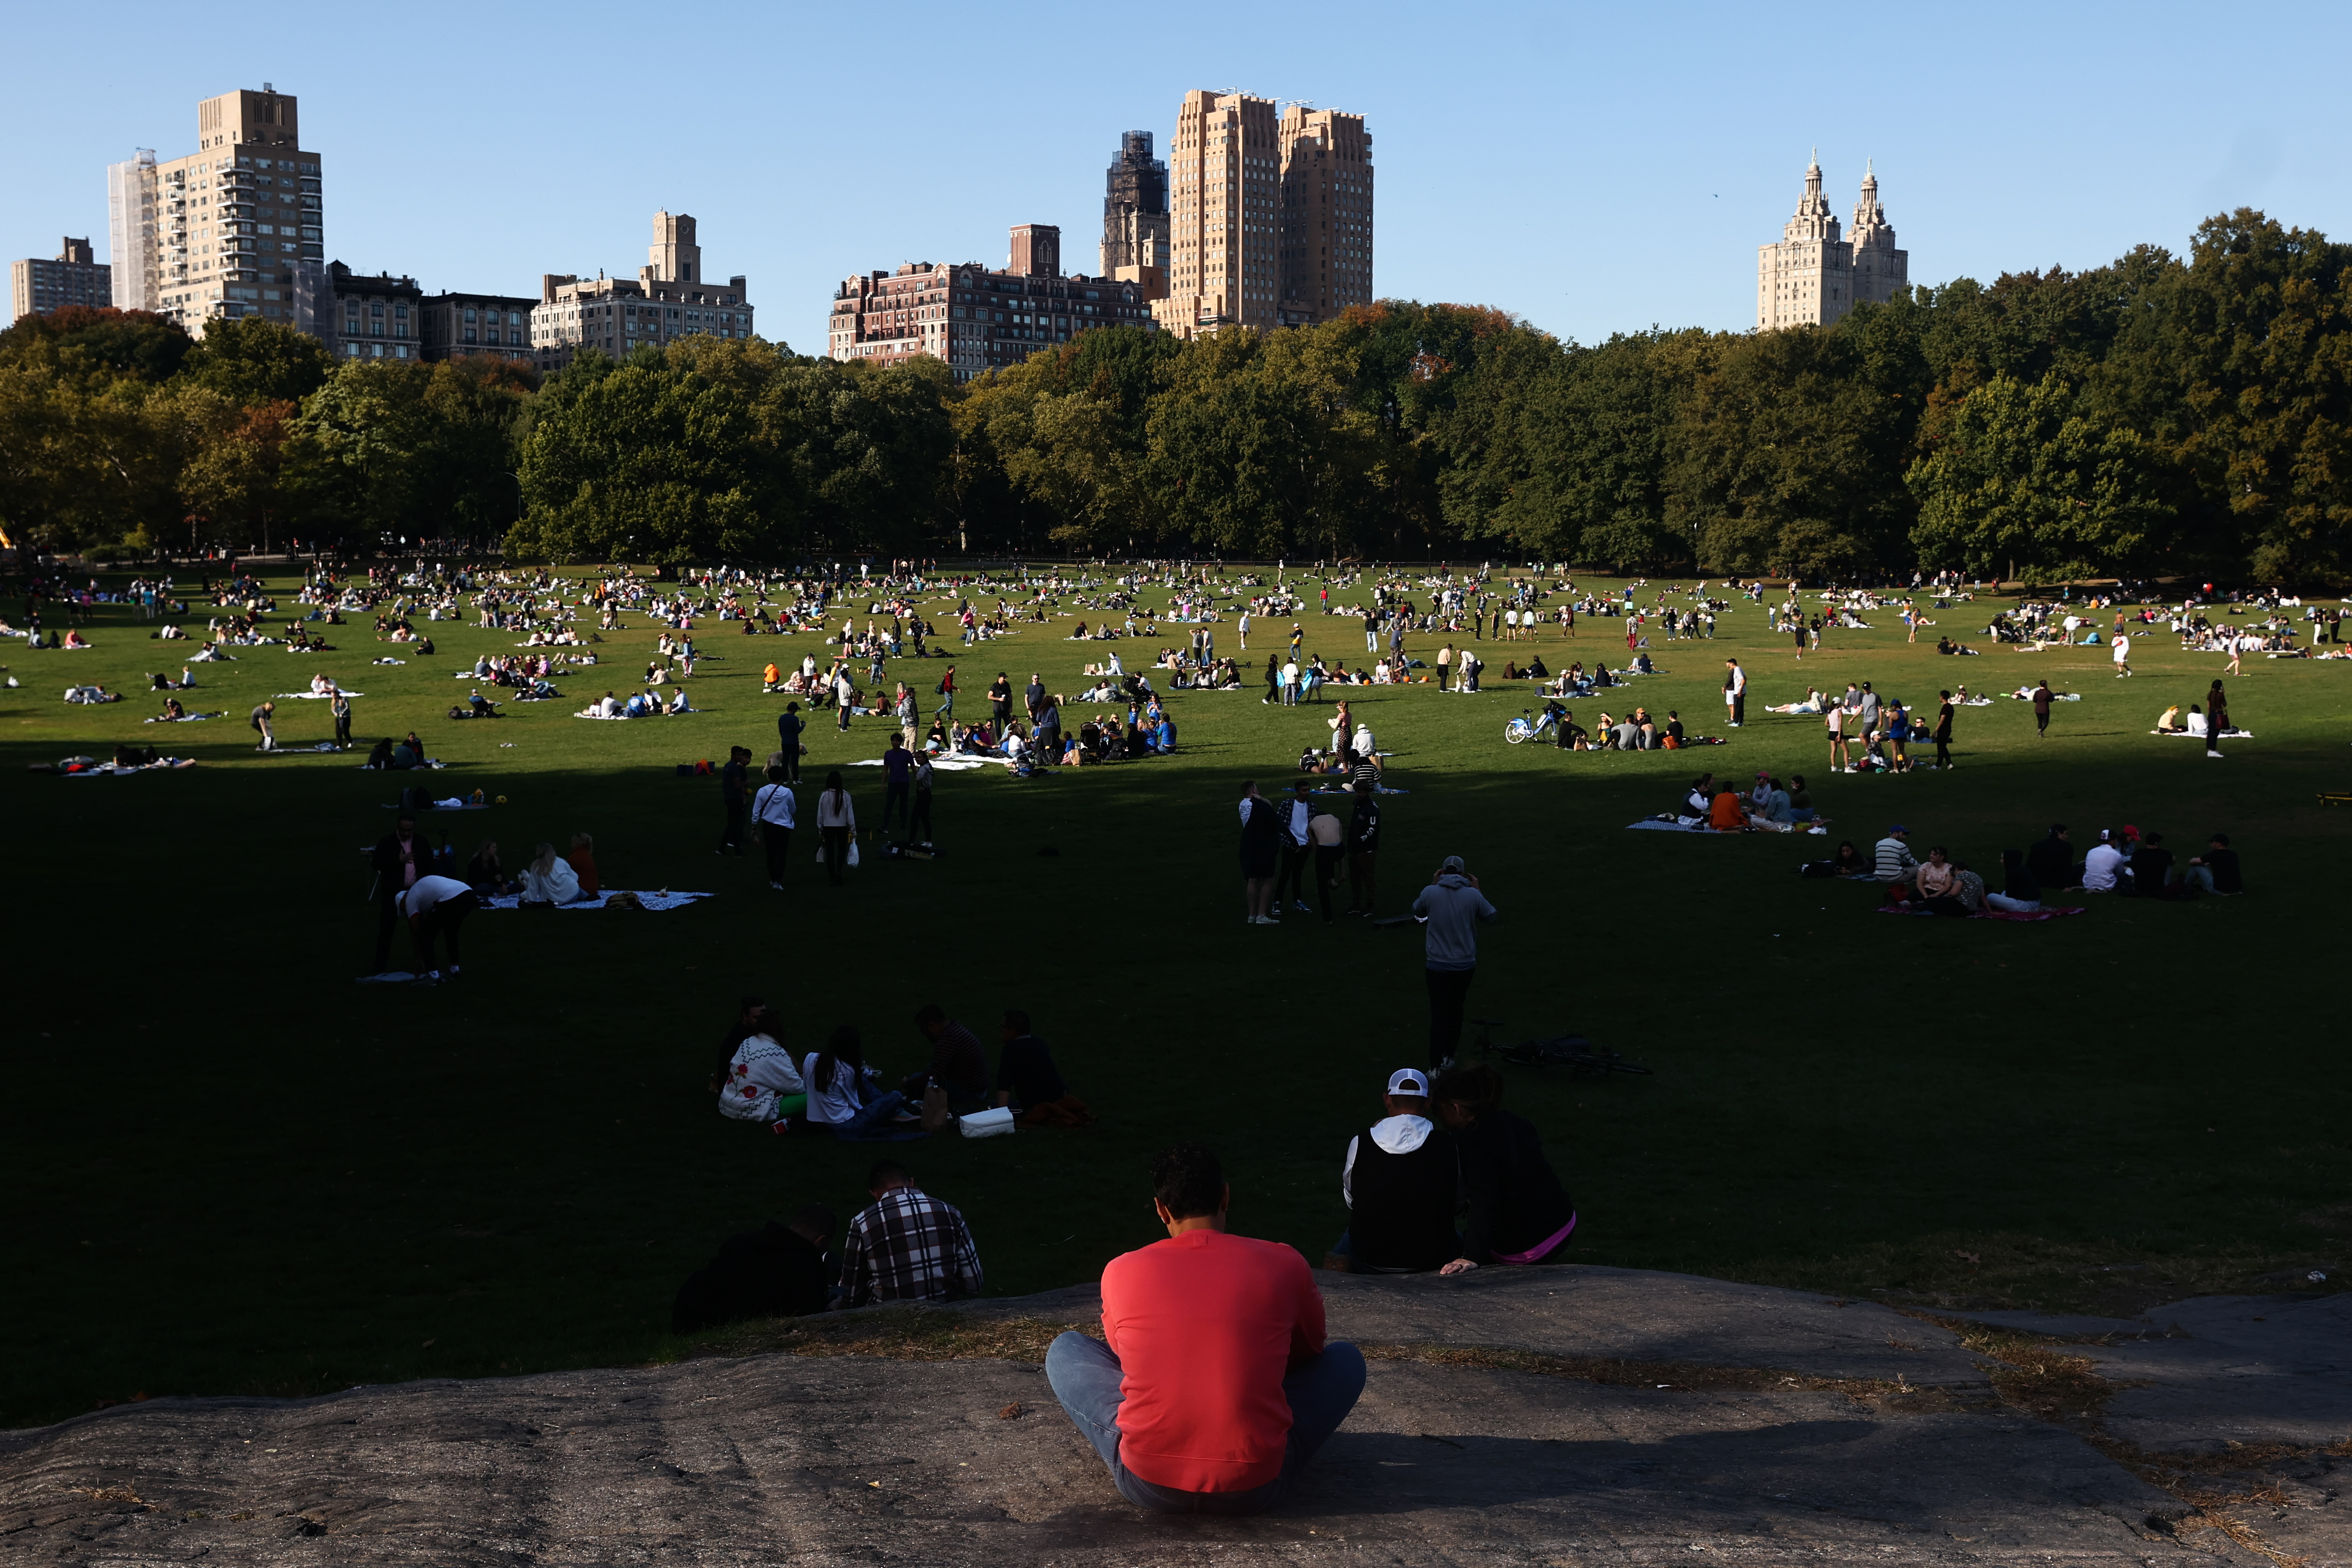 People rest on the Sheep Meadow in the Central Park in New York City, United States on October 22, 2022. (Photo by Jakub Porzycki/NurPhoto via Getty Images)